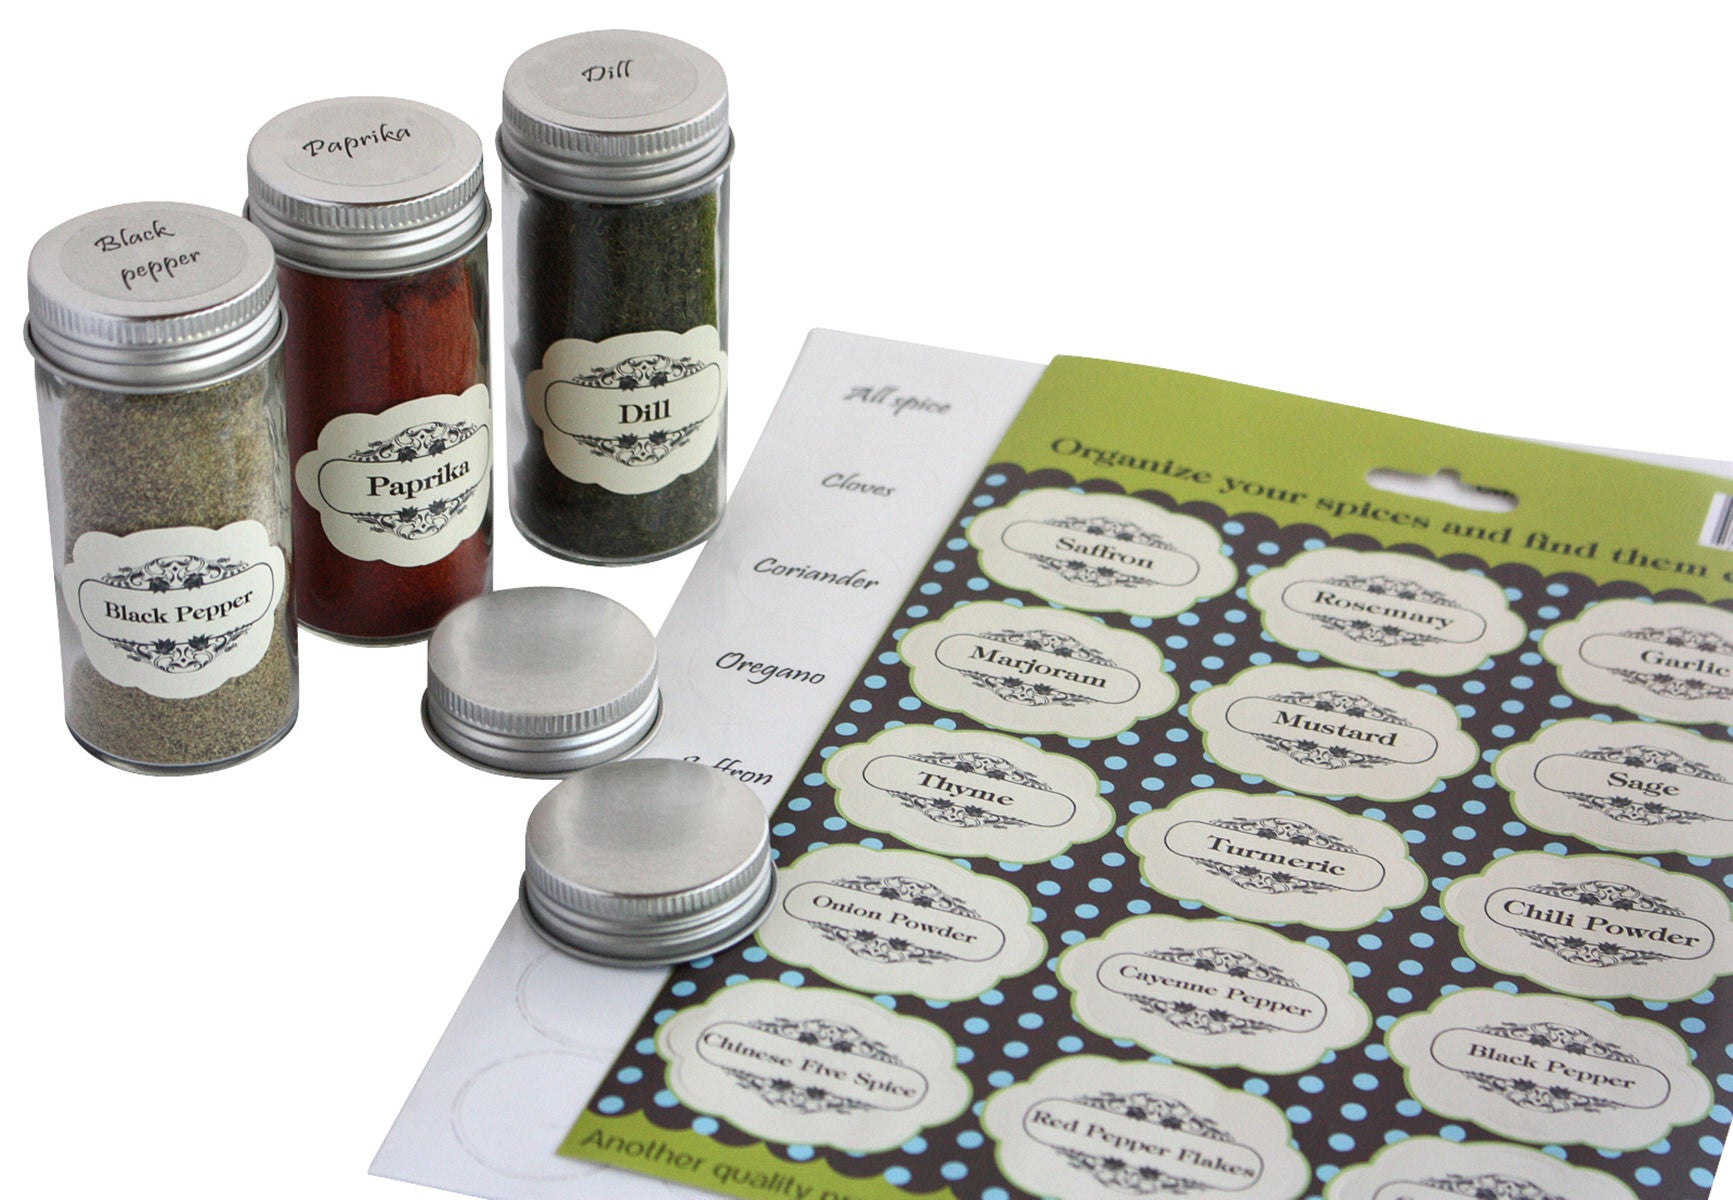 High-Quality Set of 15 Empty Spice Jars with Labels - Versatile